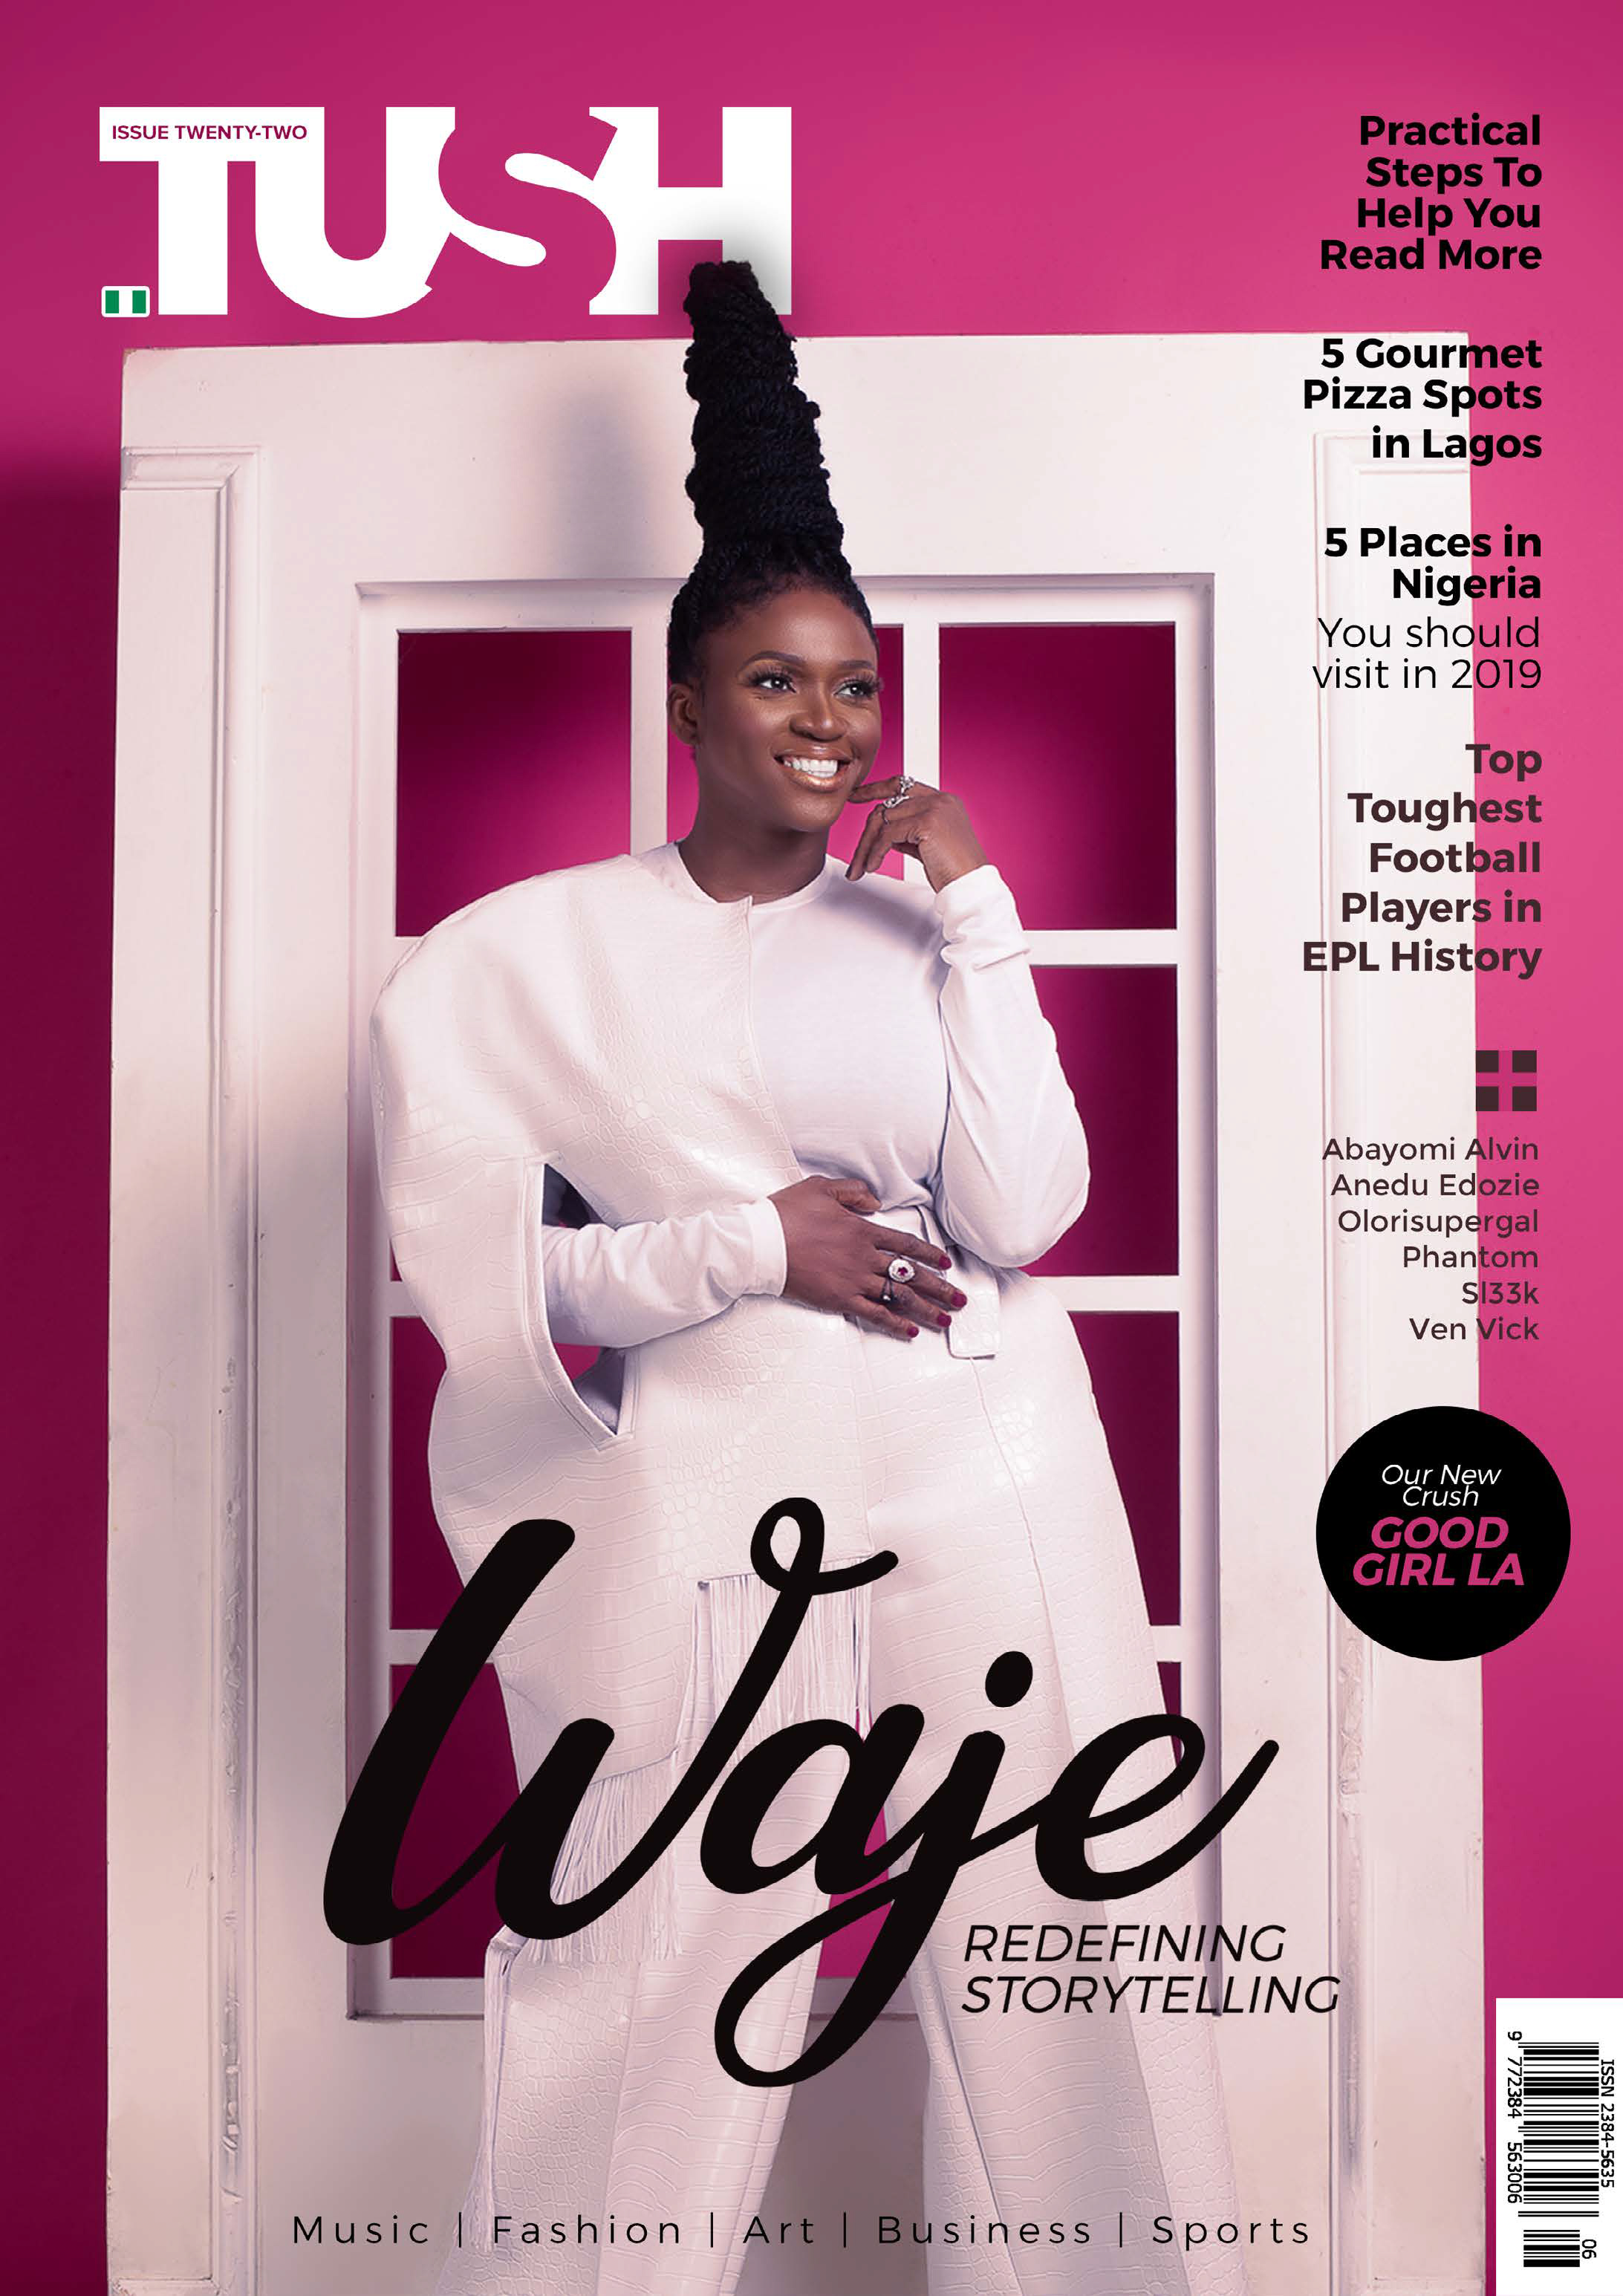 Introducing Tush Magazine’s 22nd issue cover star… Waje! jaiyeorie